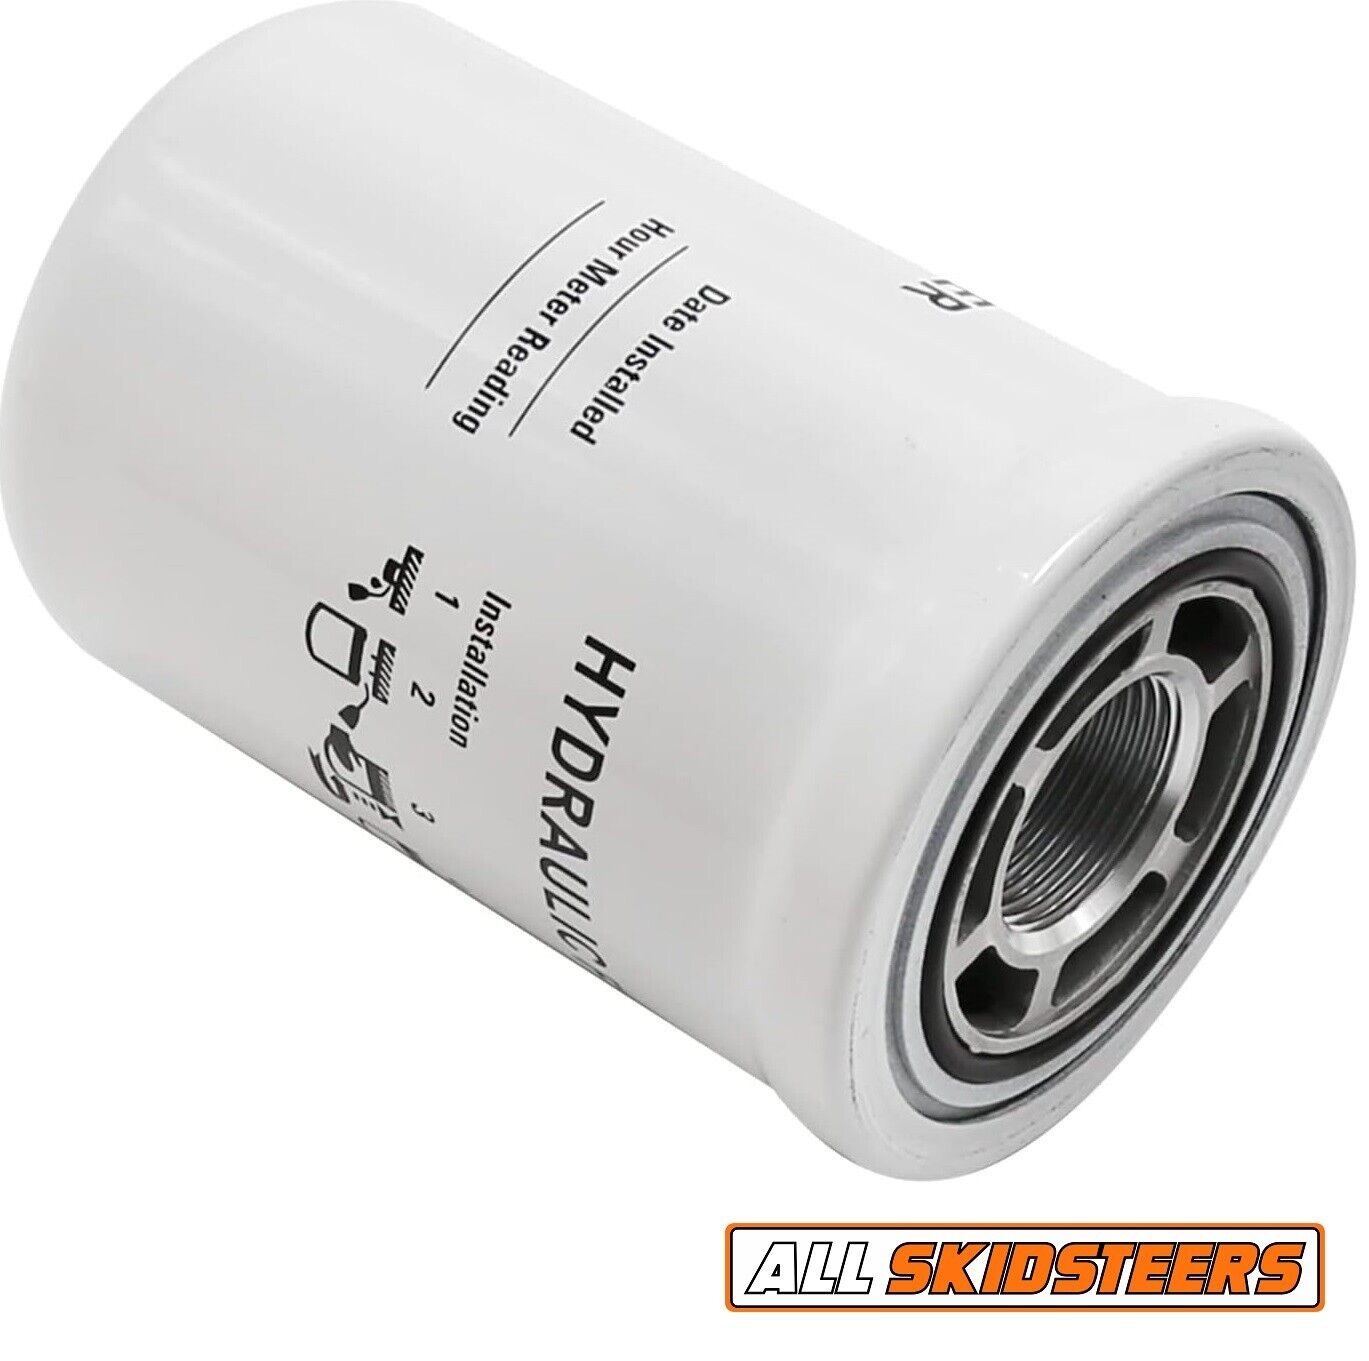 For Bobcat Hydraulic Oil Filter F Series 751 753 763 773 7753 843 853 863 873